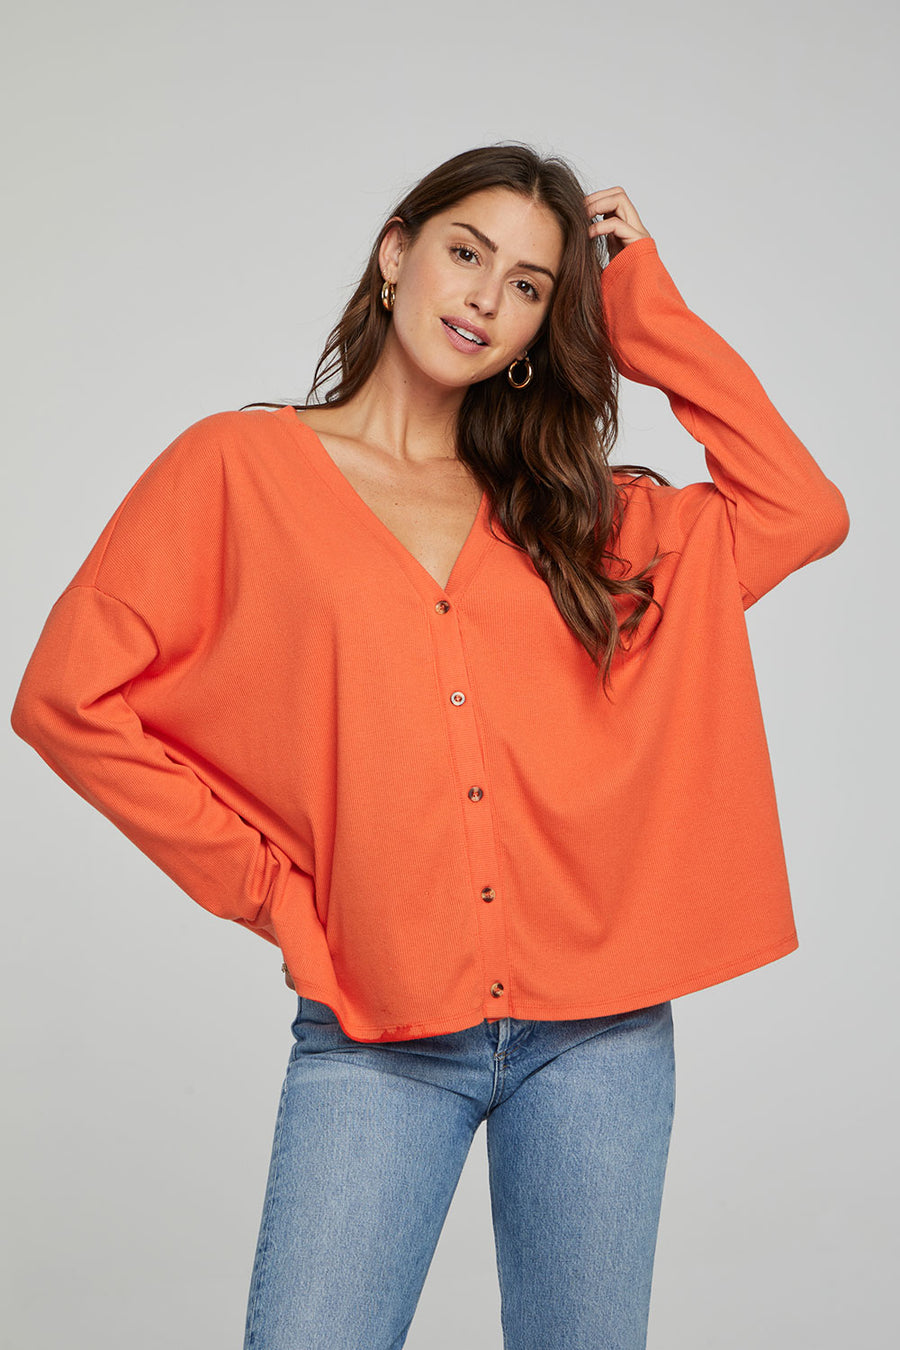 Electric Button Down WOMENS chaserbrand